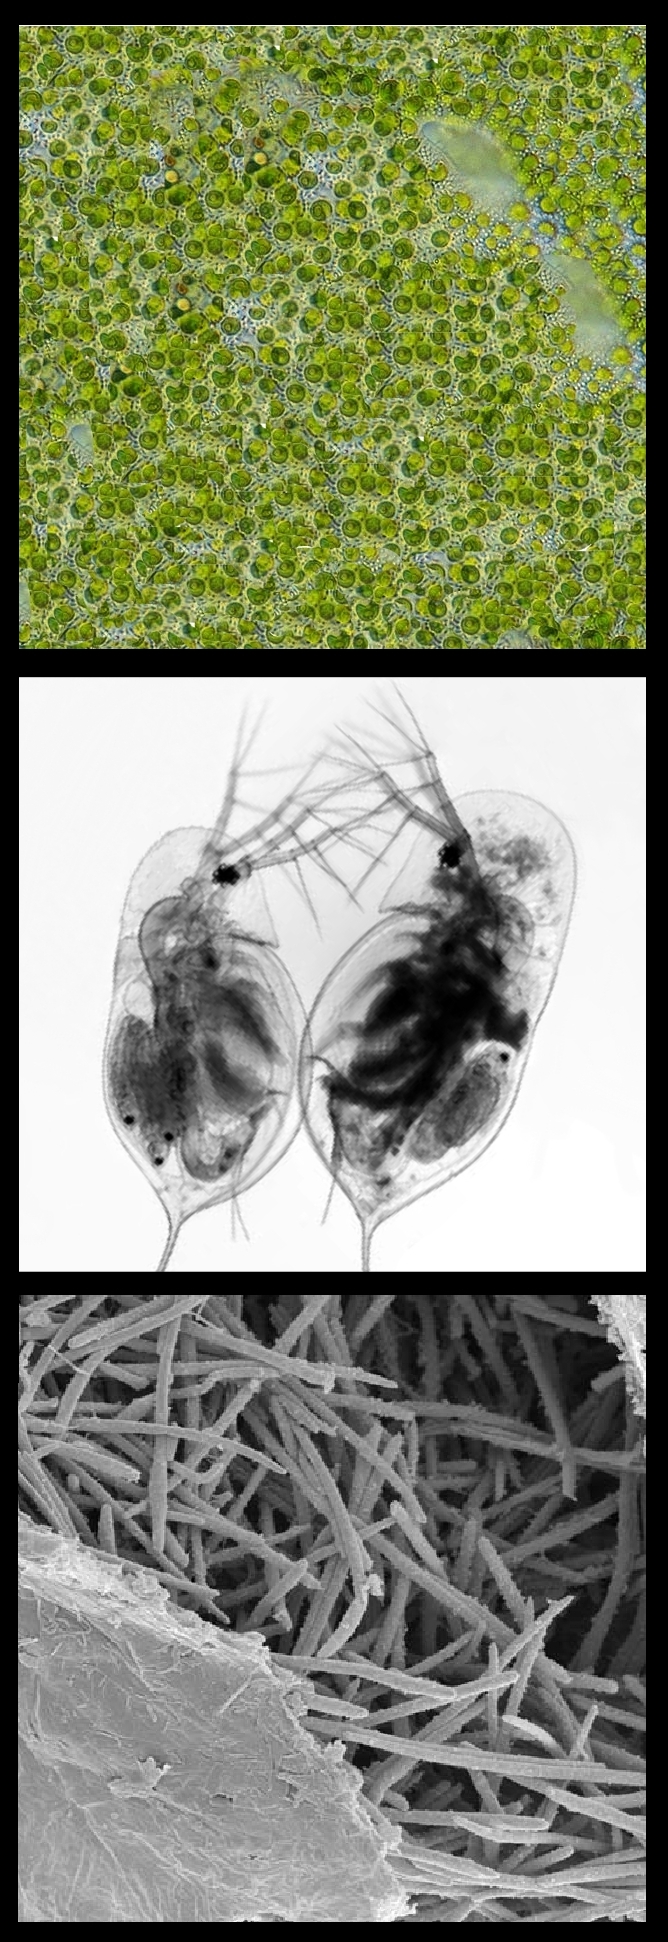 Three combined images showing Algae, Daphnia, and fungal spores